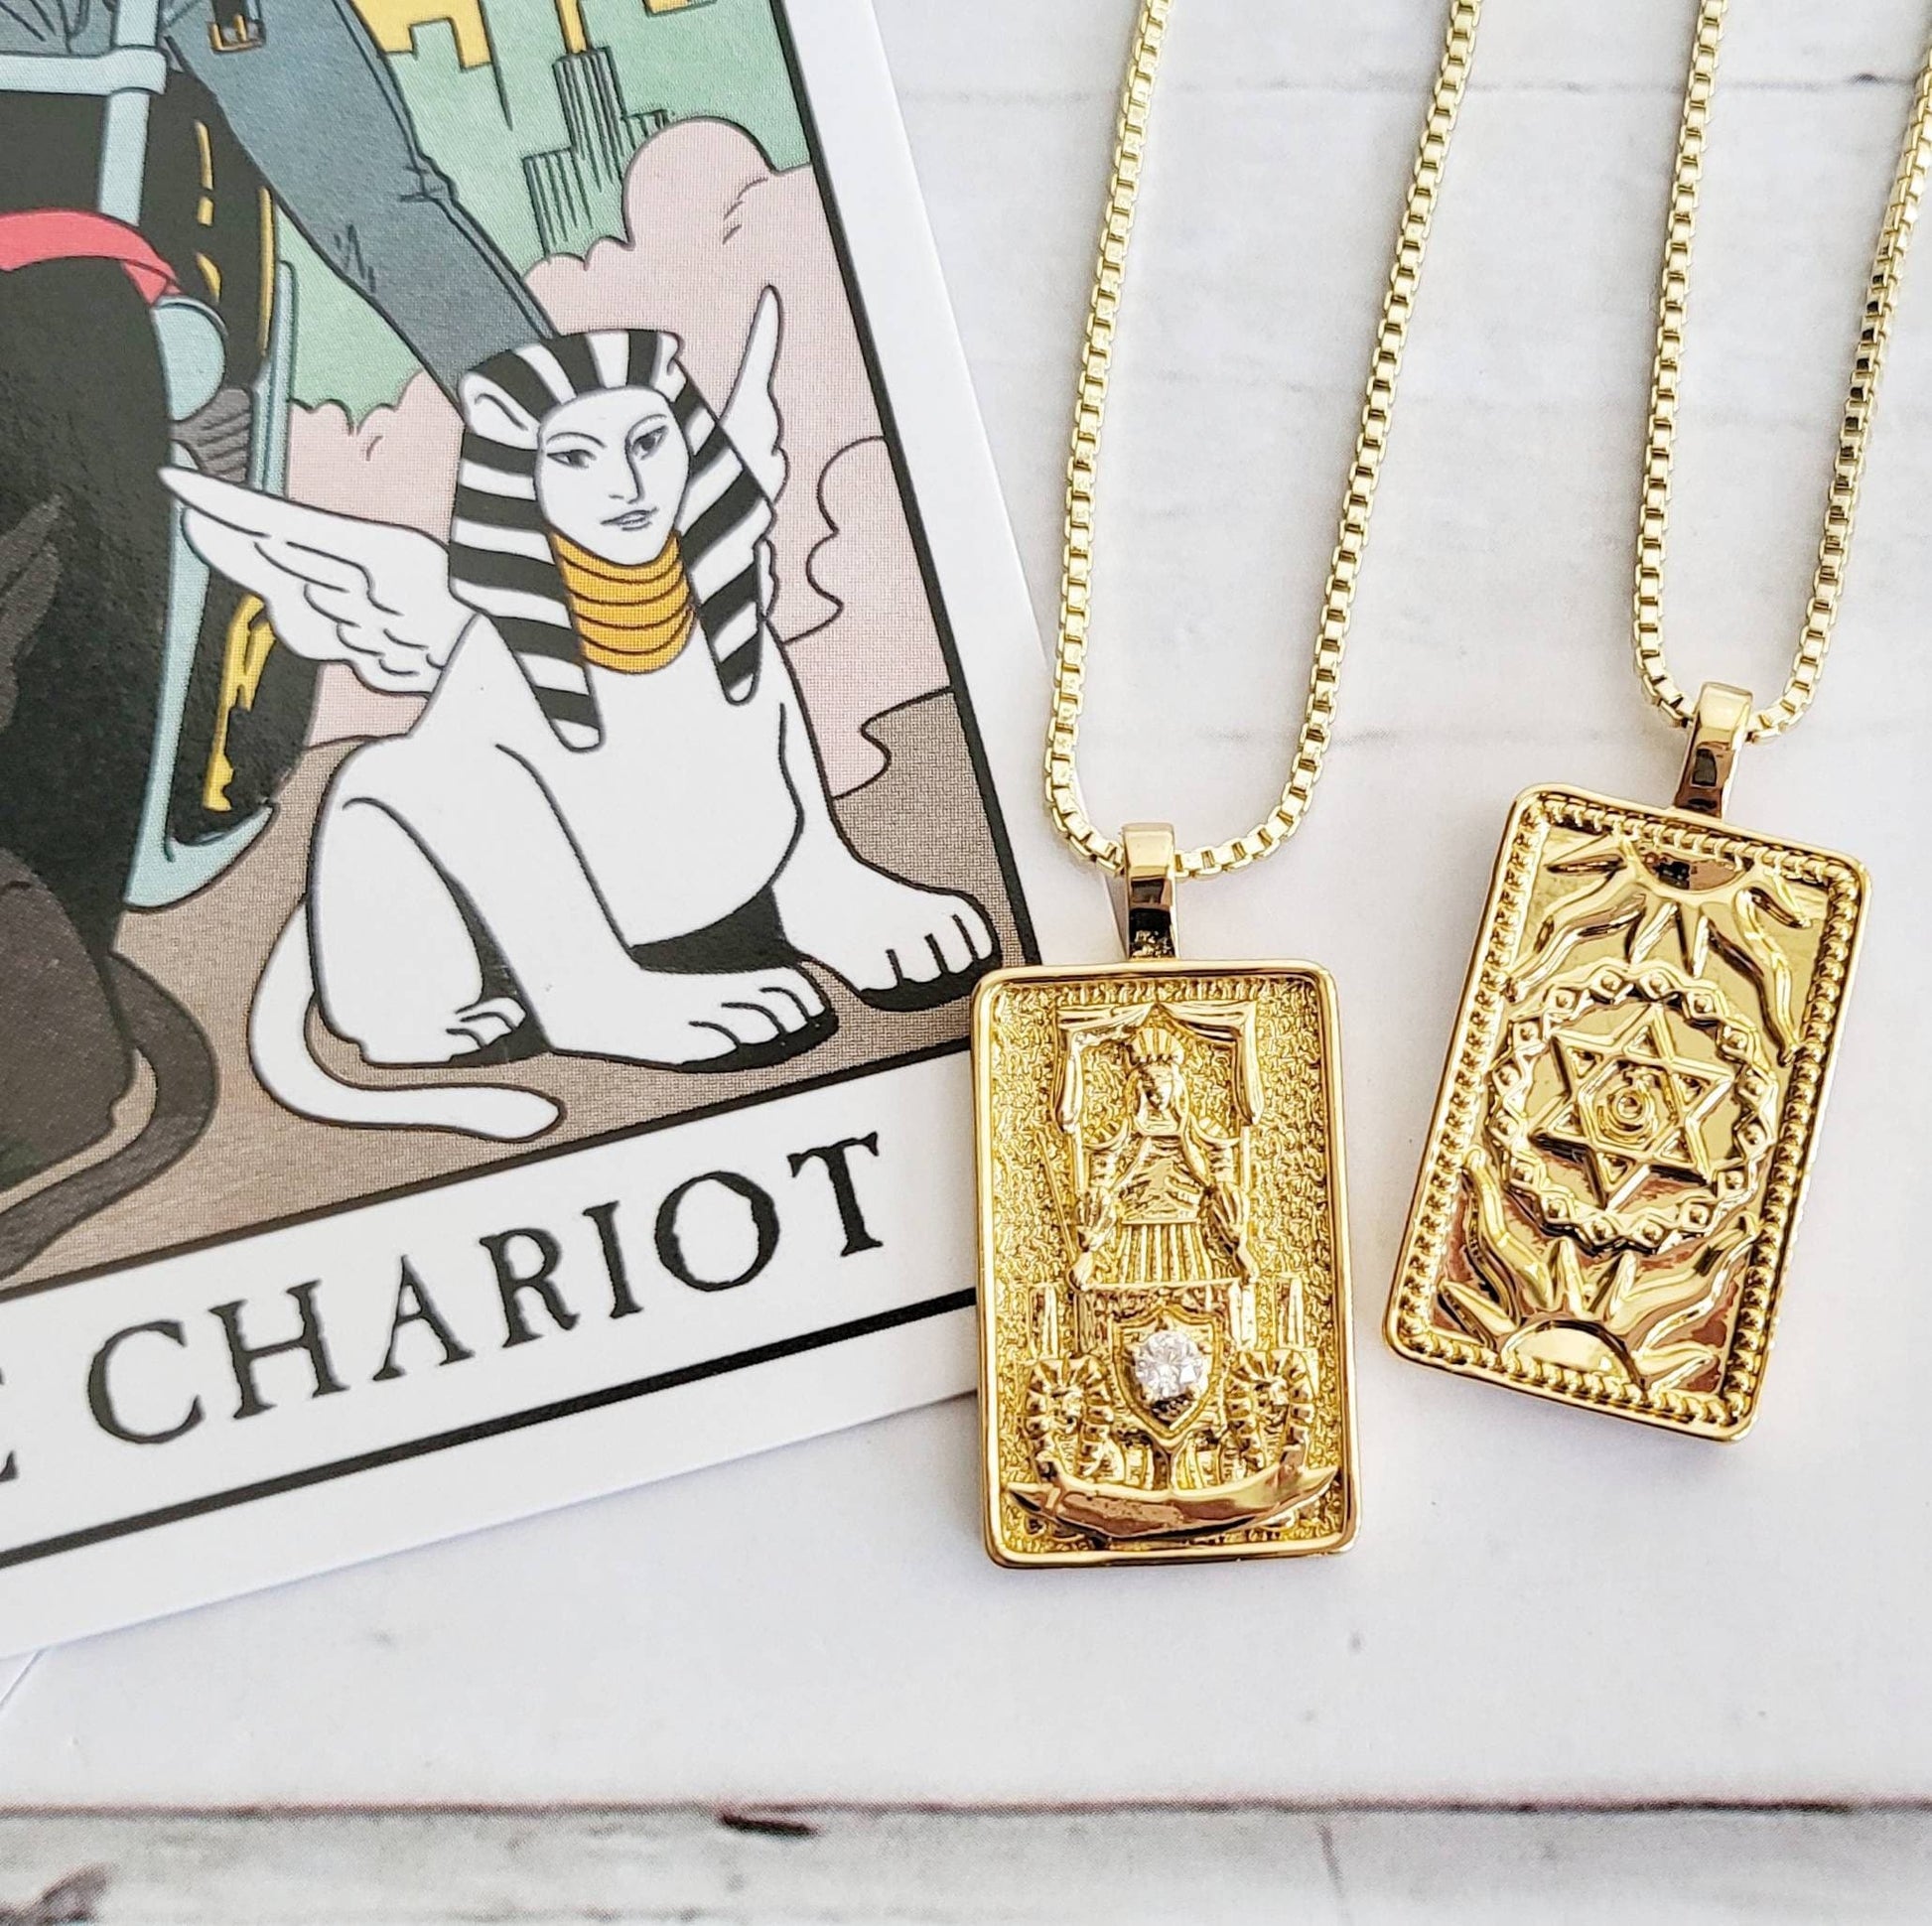 THE CHARIOT Tarot Card Necklace | 14K Gold Pendant Necklace | Delicate Minimalist Intention Celestial Necklace | Cancer Astrology Jewelry